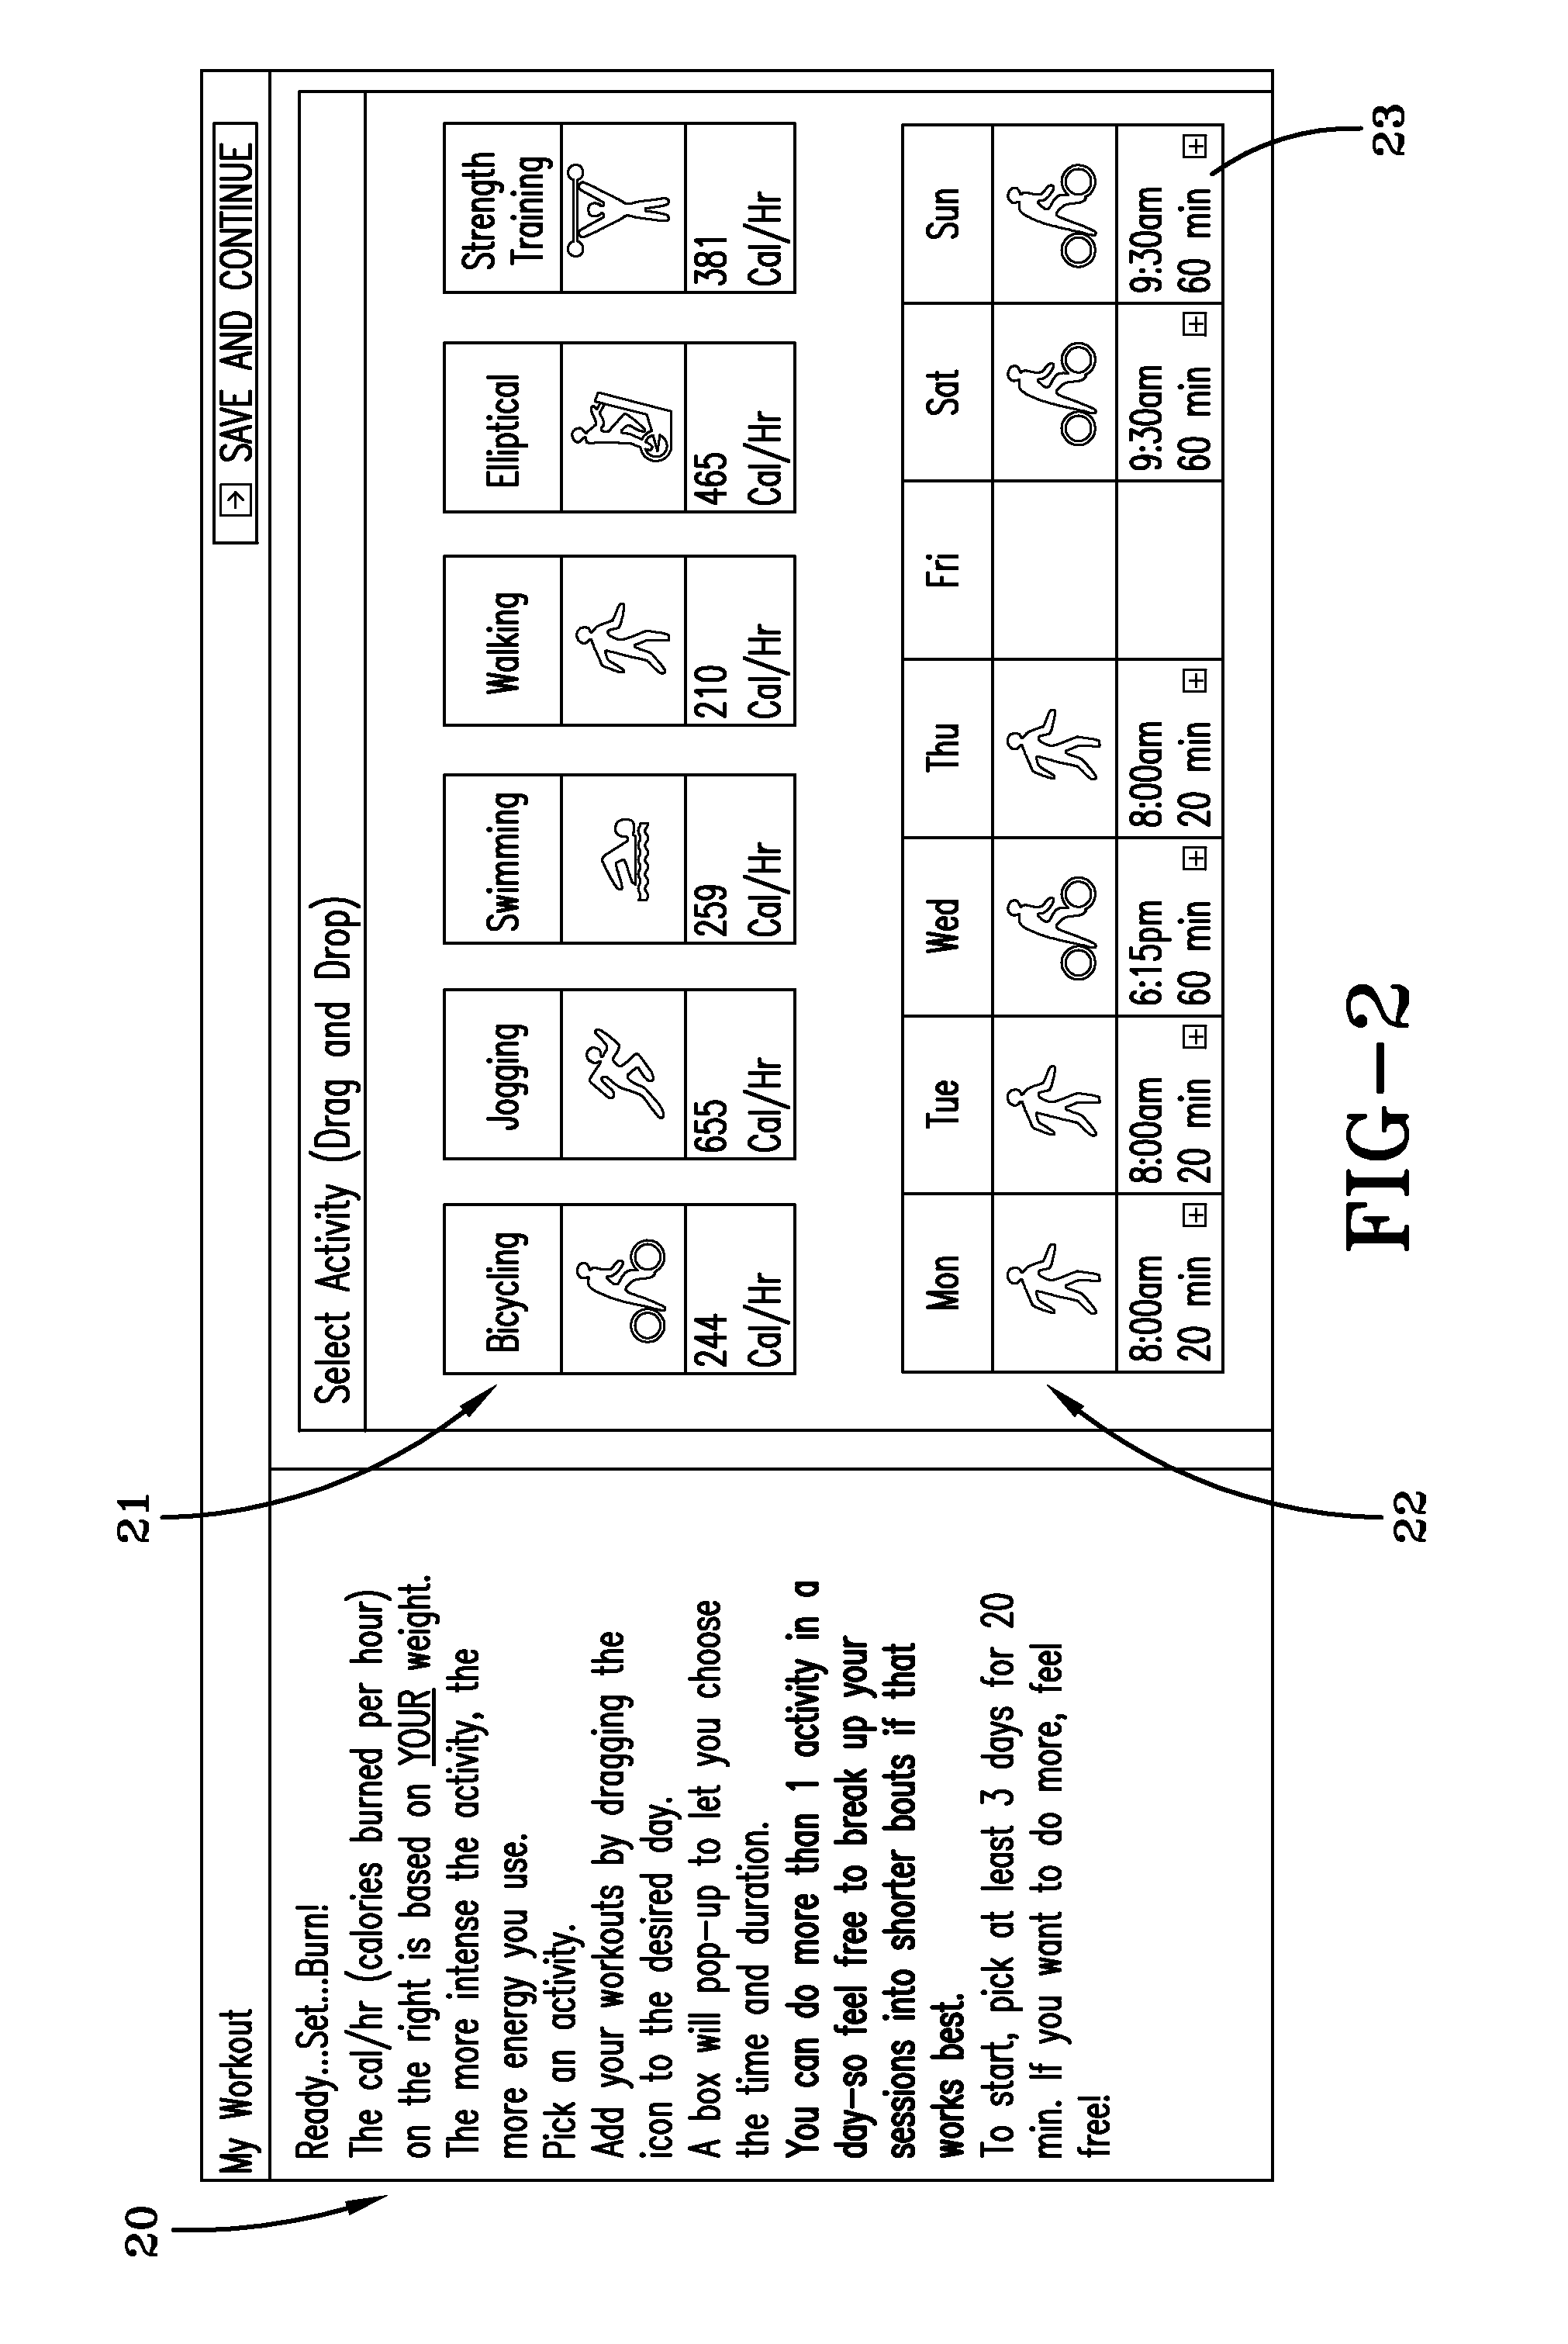 System for incorporating data from biometric devices into a feedback message to a mobile device